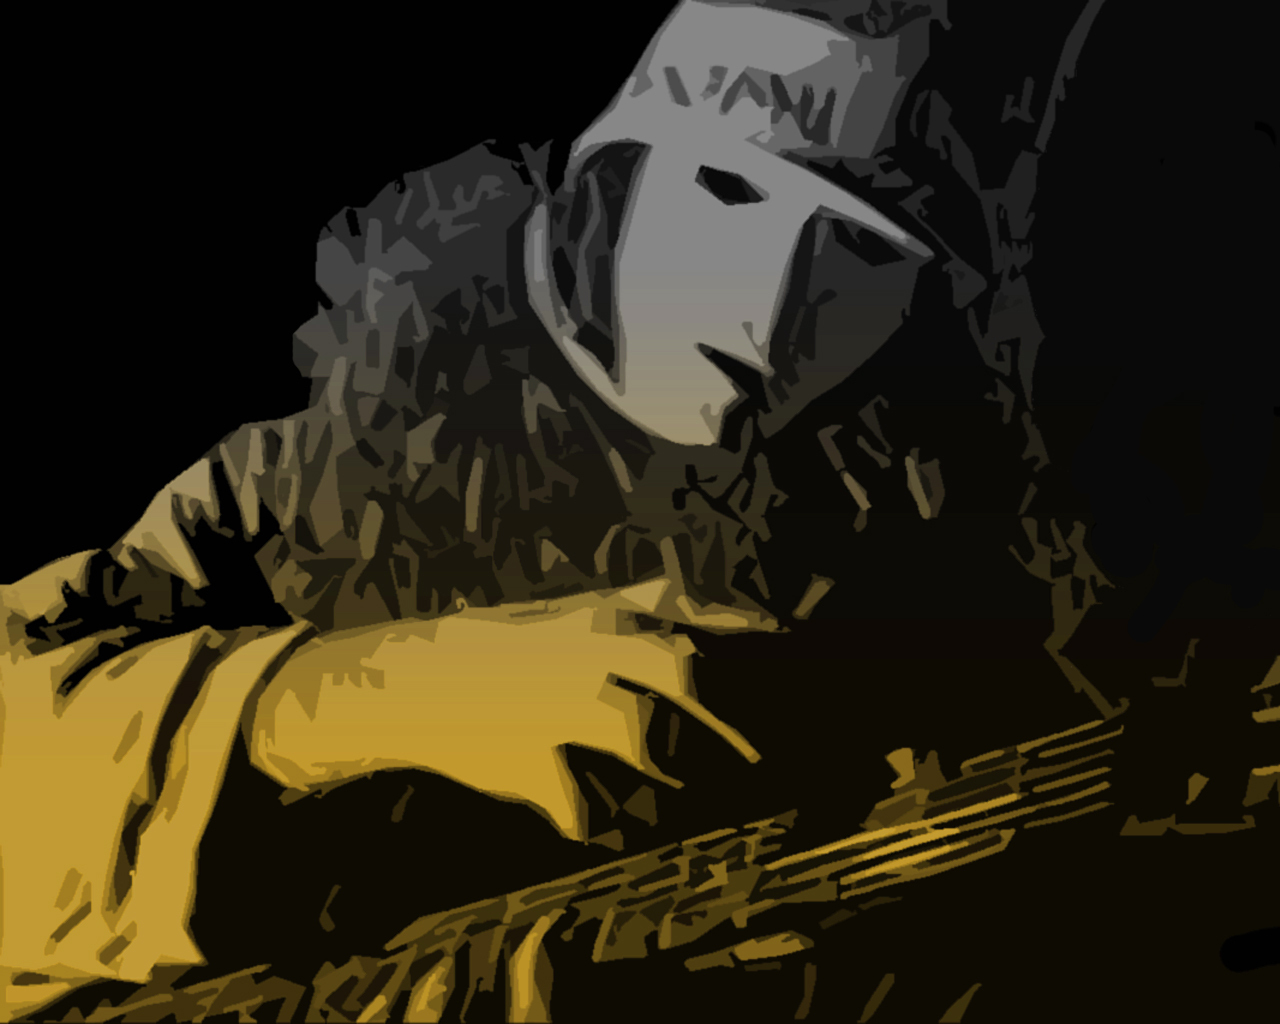 Buckethead Image HD Wallpaper And Background